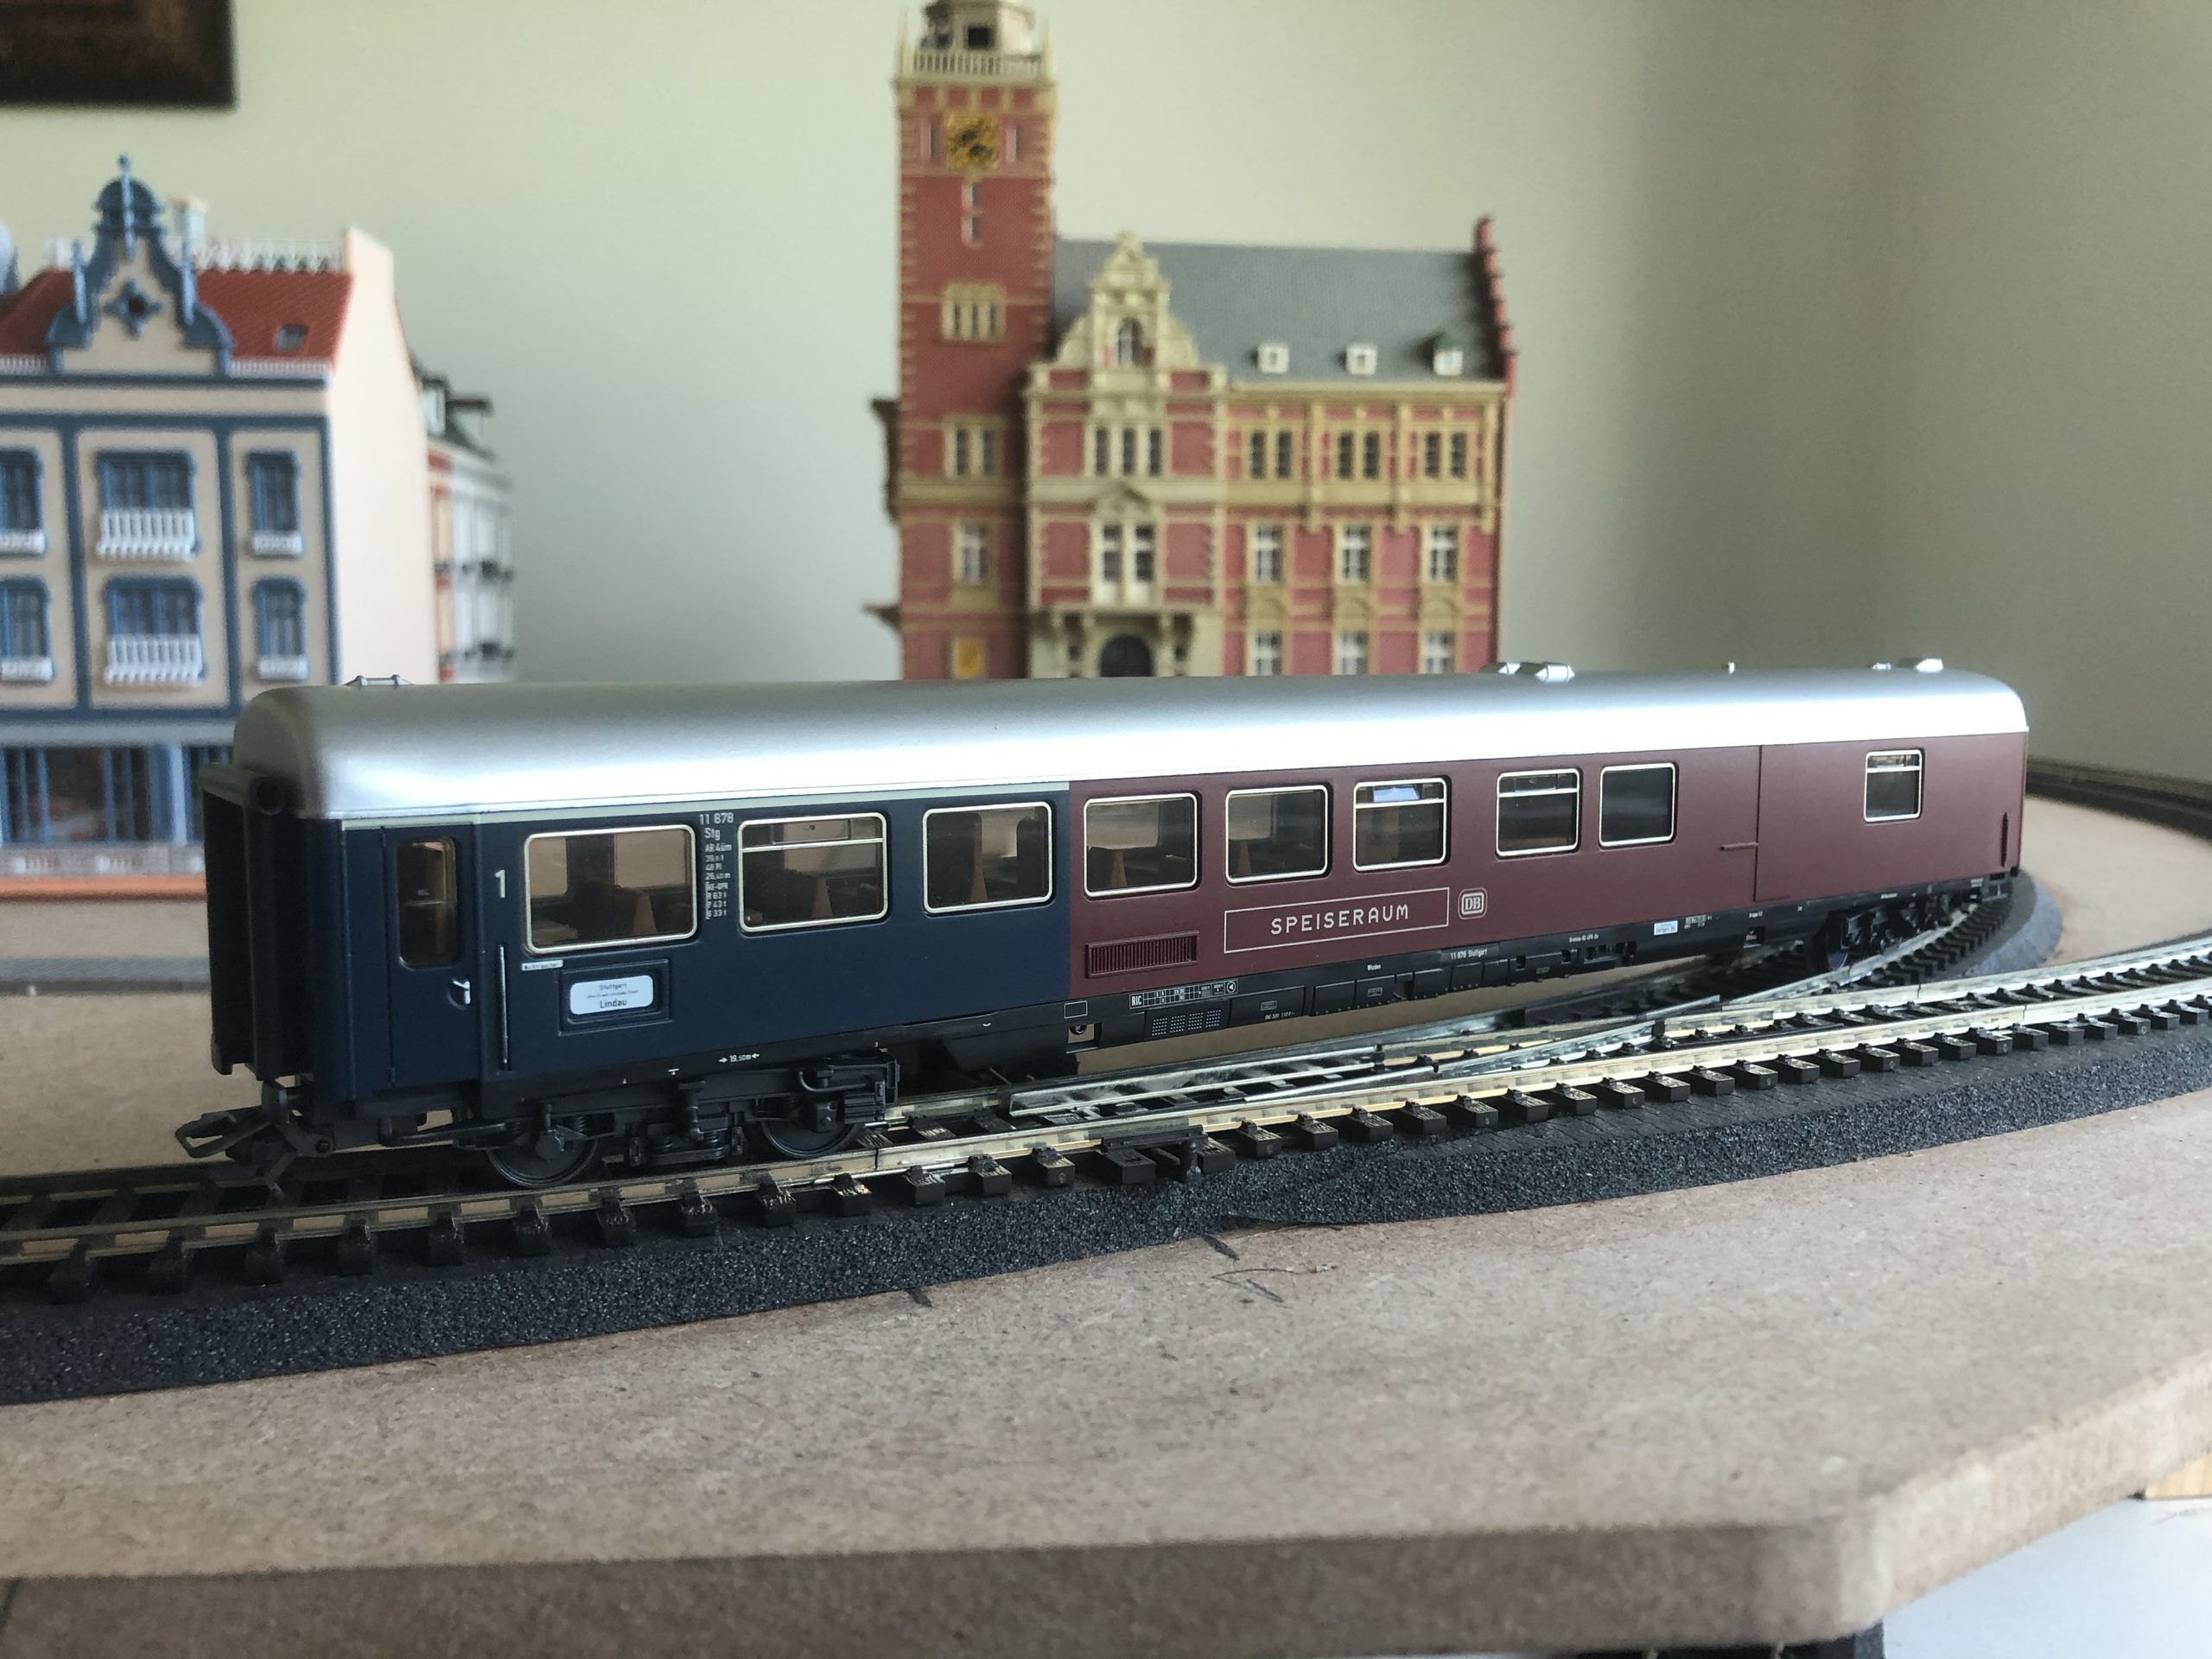 My Model Railway Year in Review